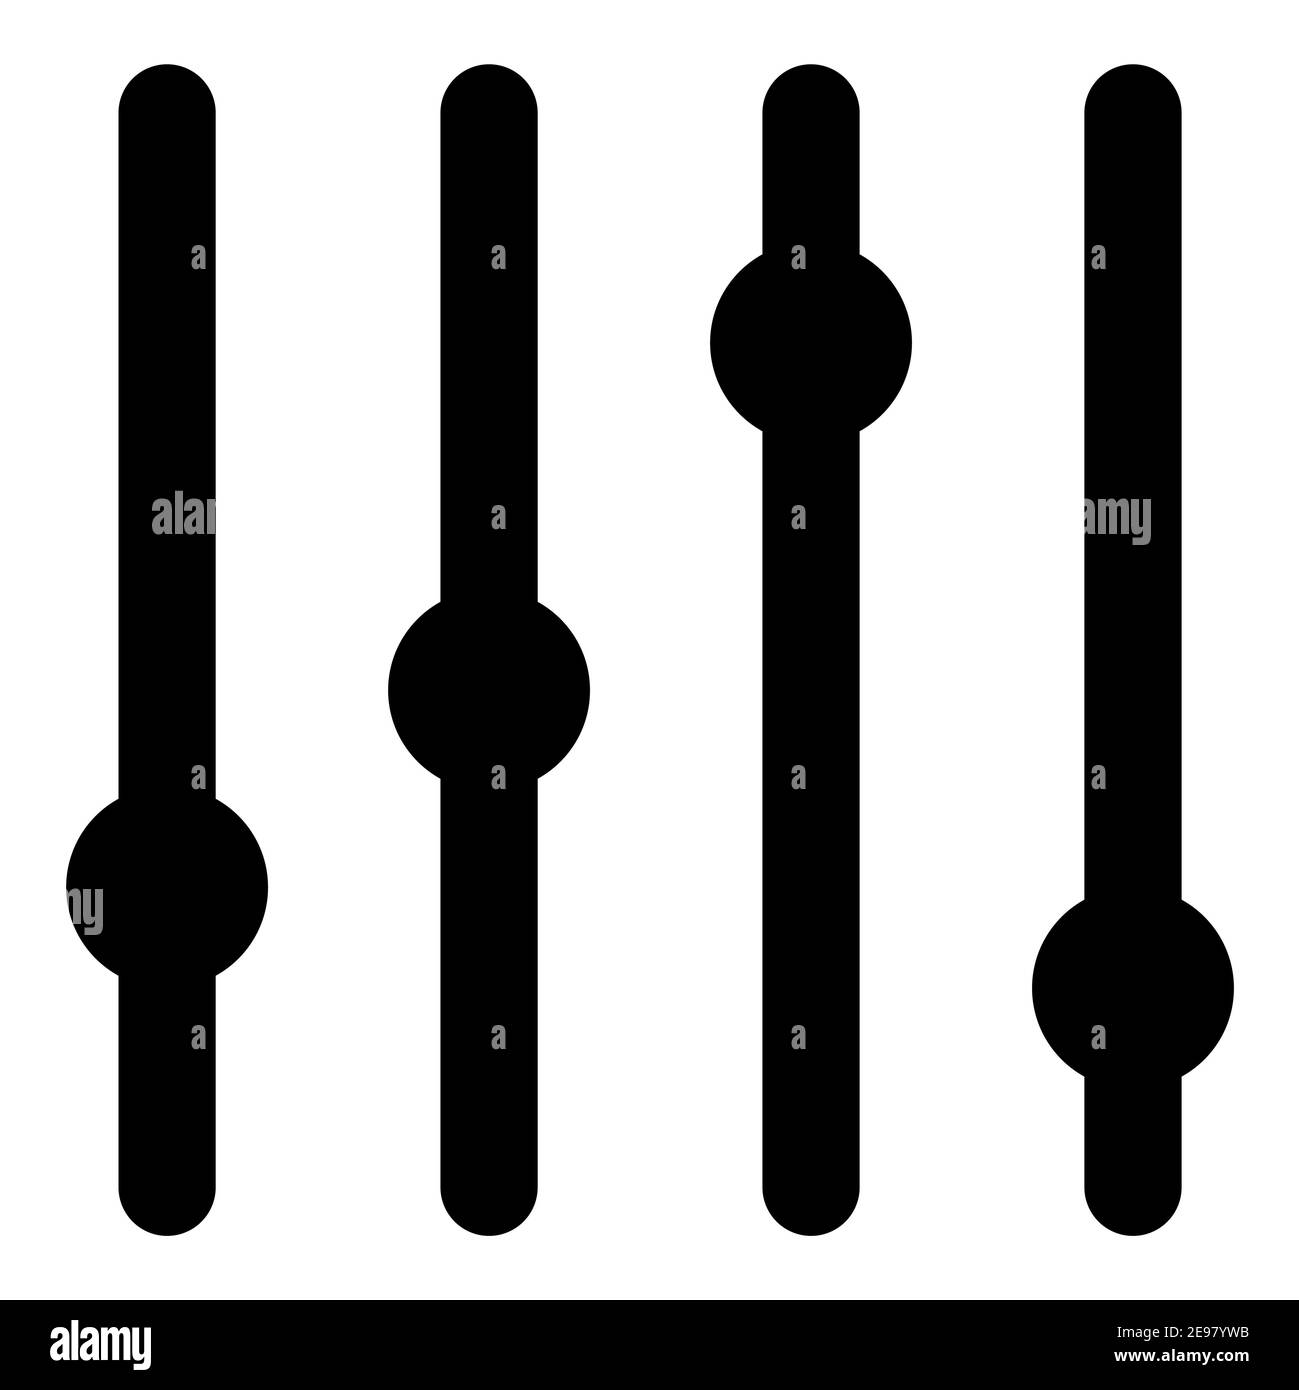 Sliders icon. Slider bar symbol isolated on white. Vector black illustration for sound mixer panel design or equalizer console control element. Eps 10 Stock Vector